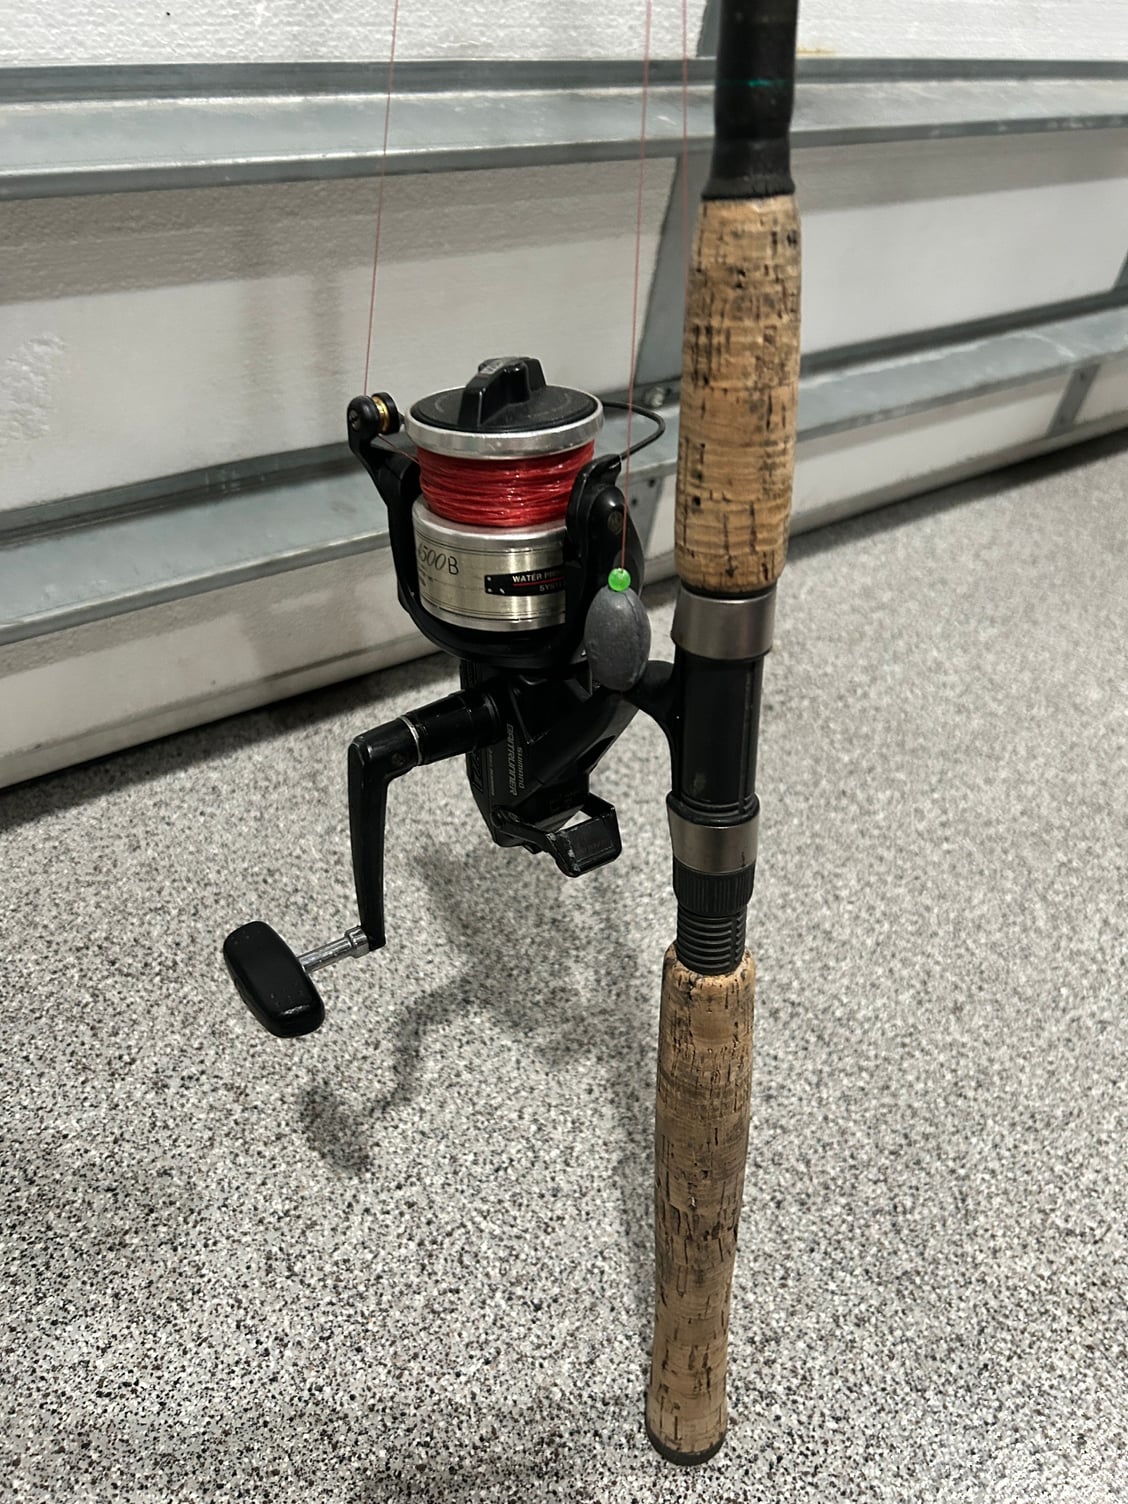 6 Shimano reels with rods for sale. Saint Petersburg Florida - The